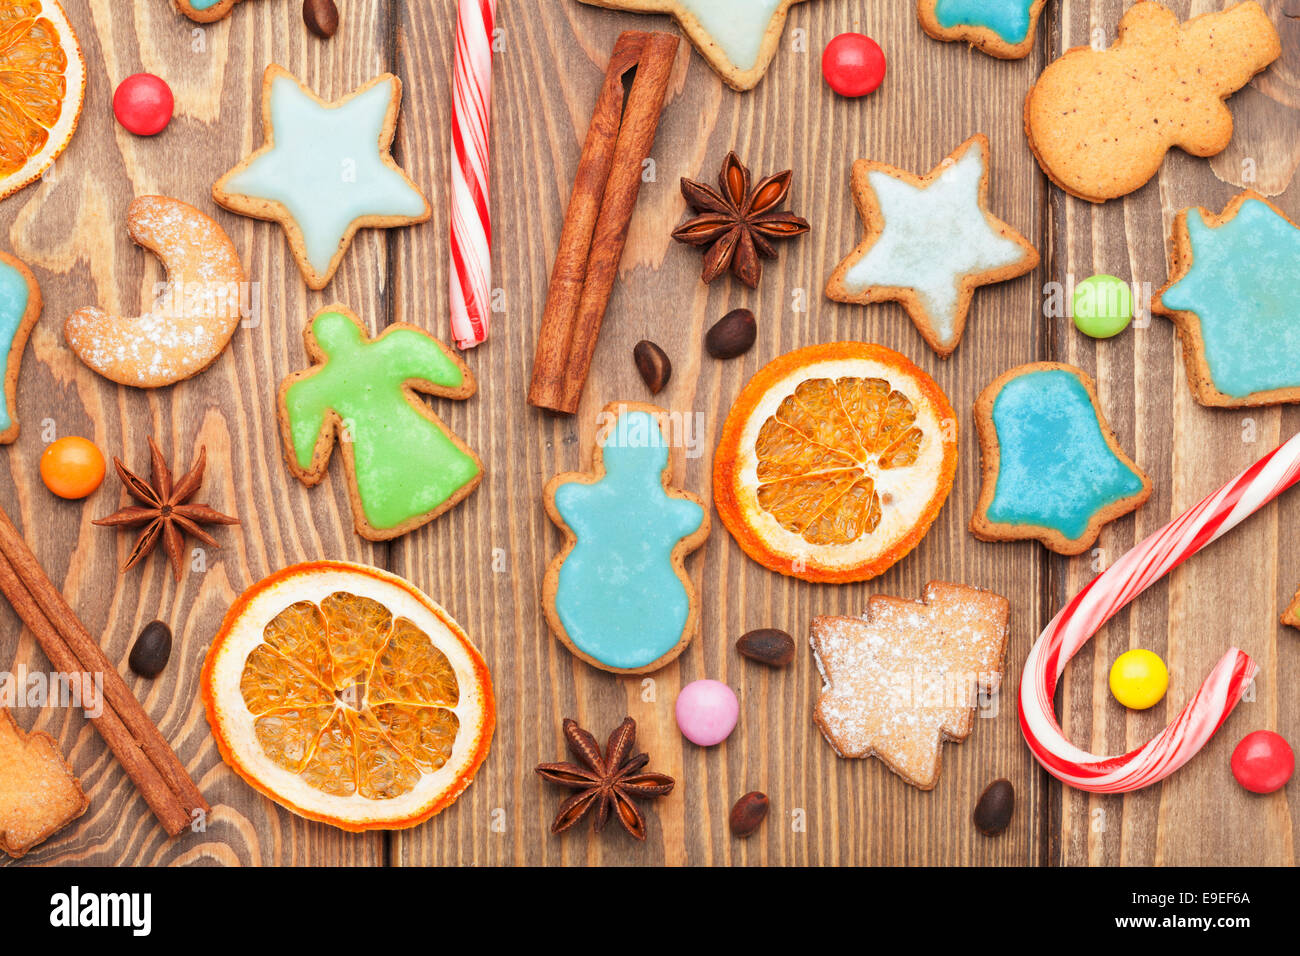 Christmas wooden background with spices and gingerbread cookies Stock Photo